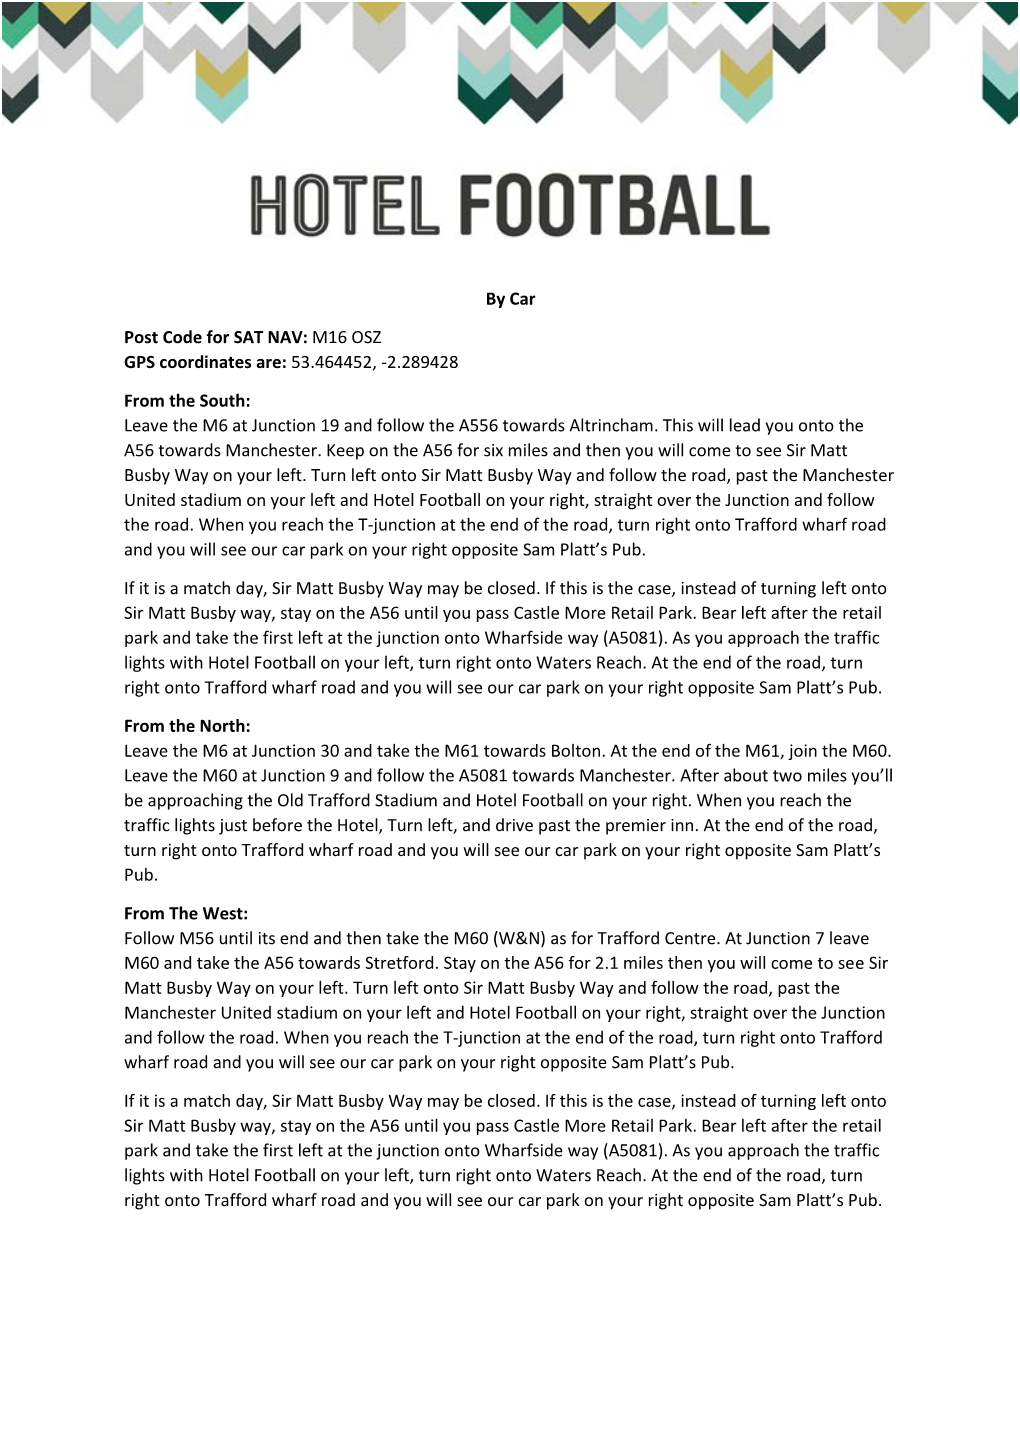 Directions to Hotel Football